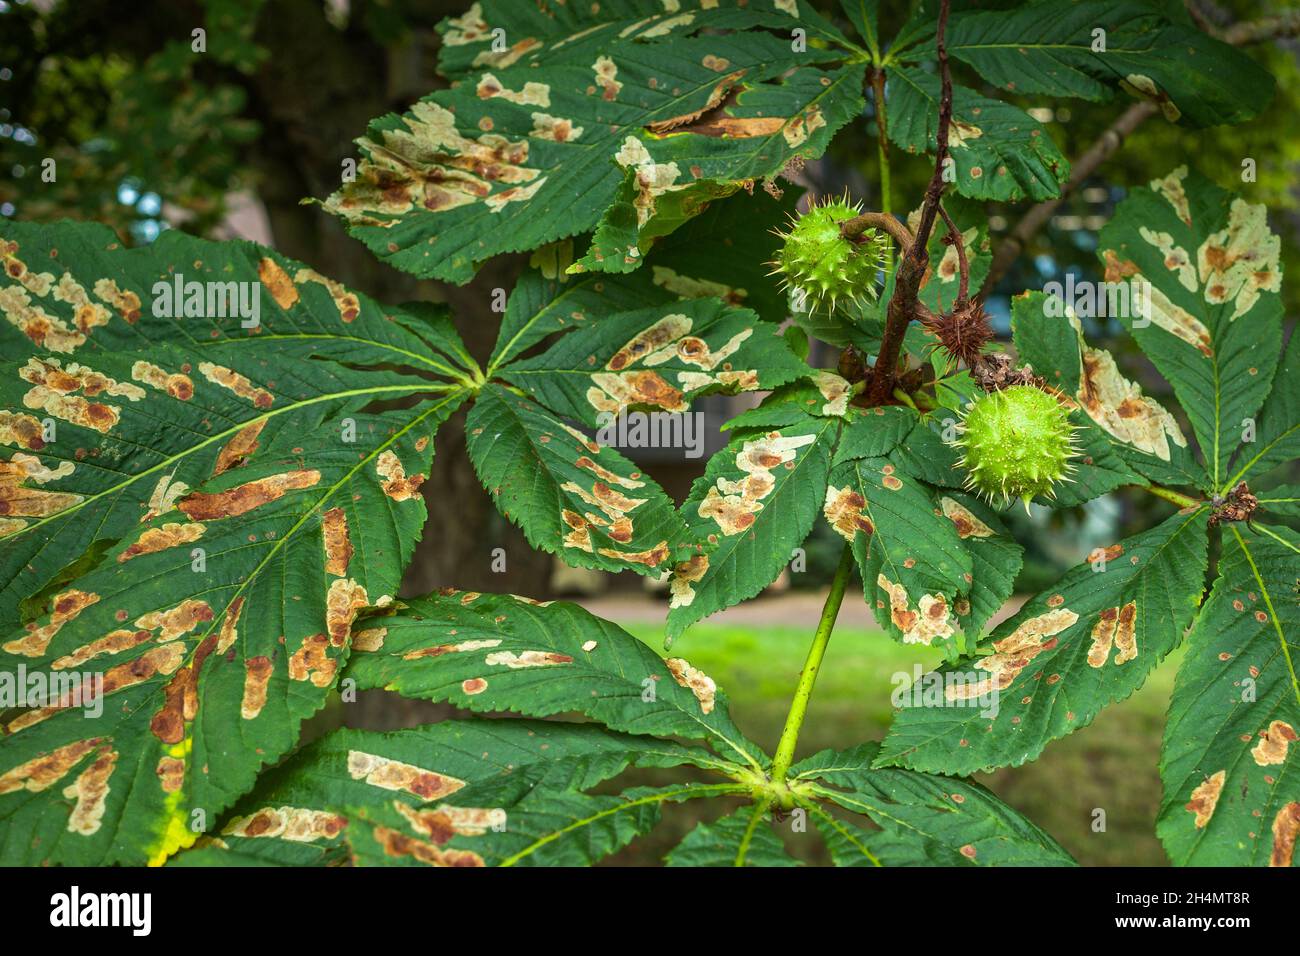 The damaged leaves of a Horse Chestnut tree as caused by the Horse chestnut leaf miner (Cameraria ohridella), an exotic insect pest. Stock Photo